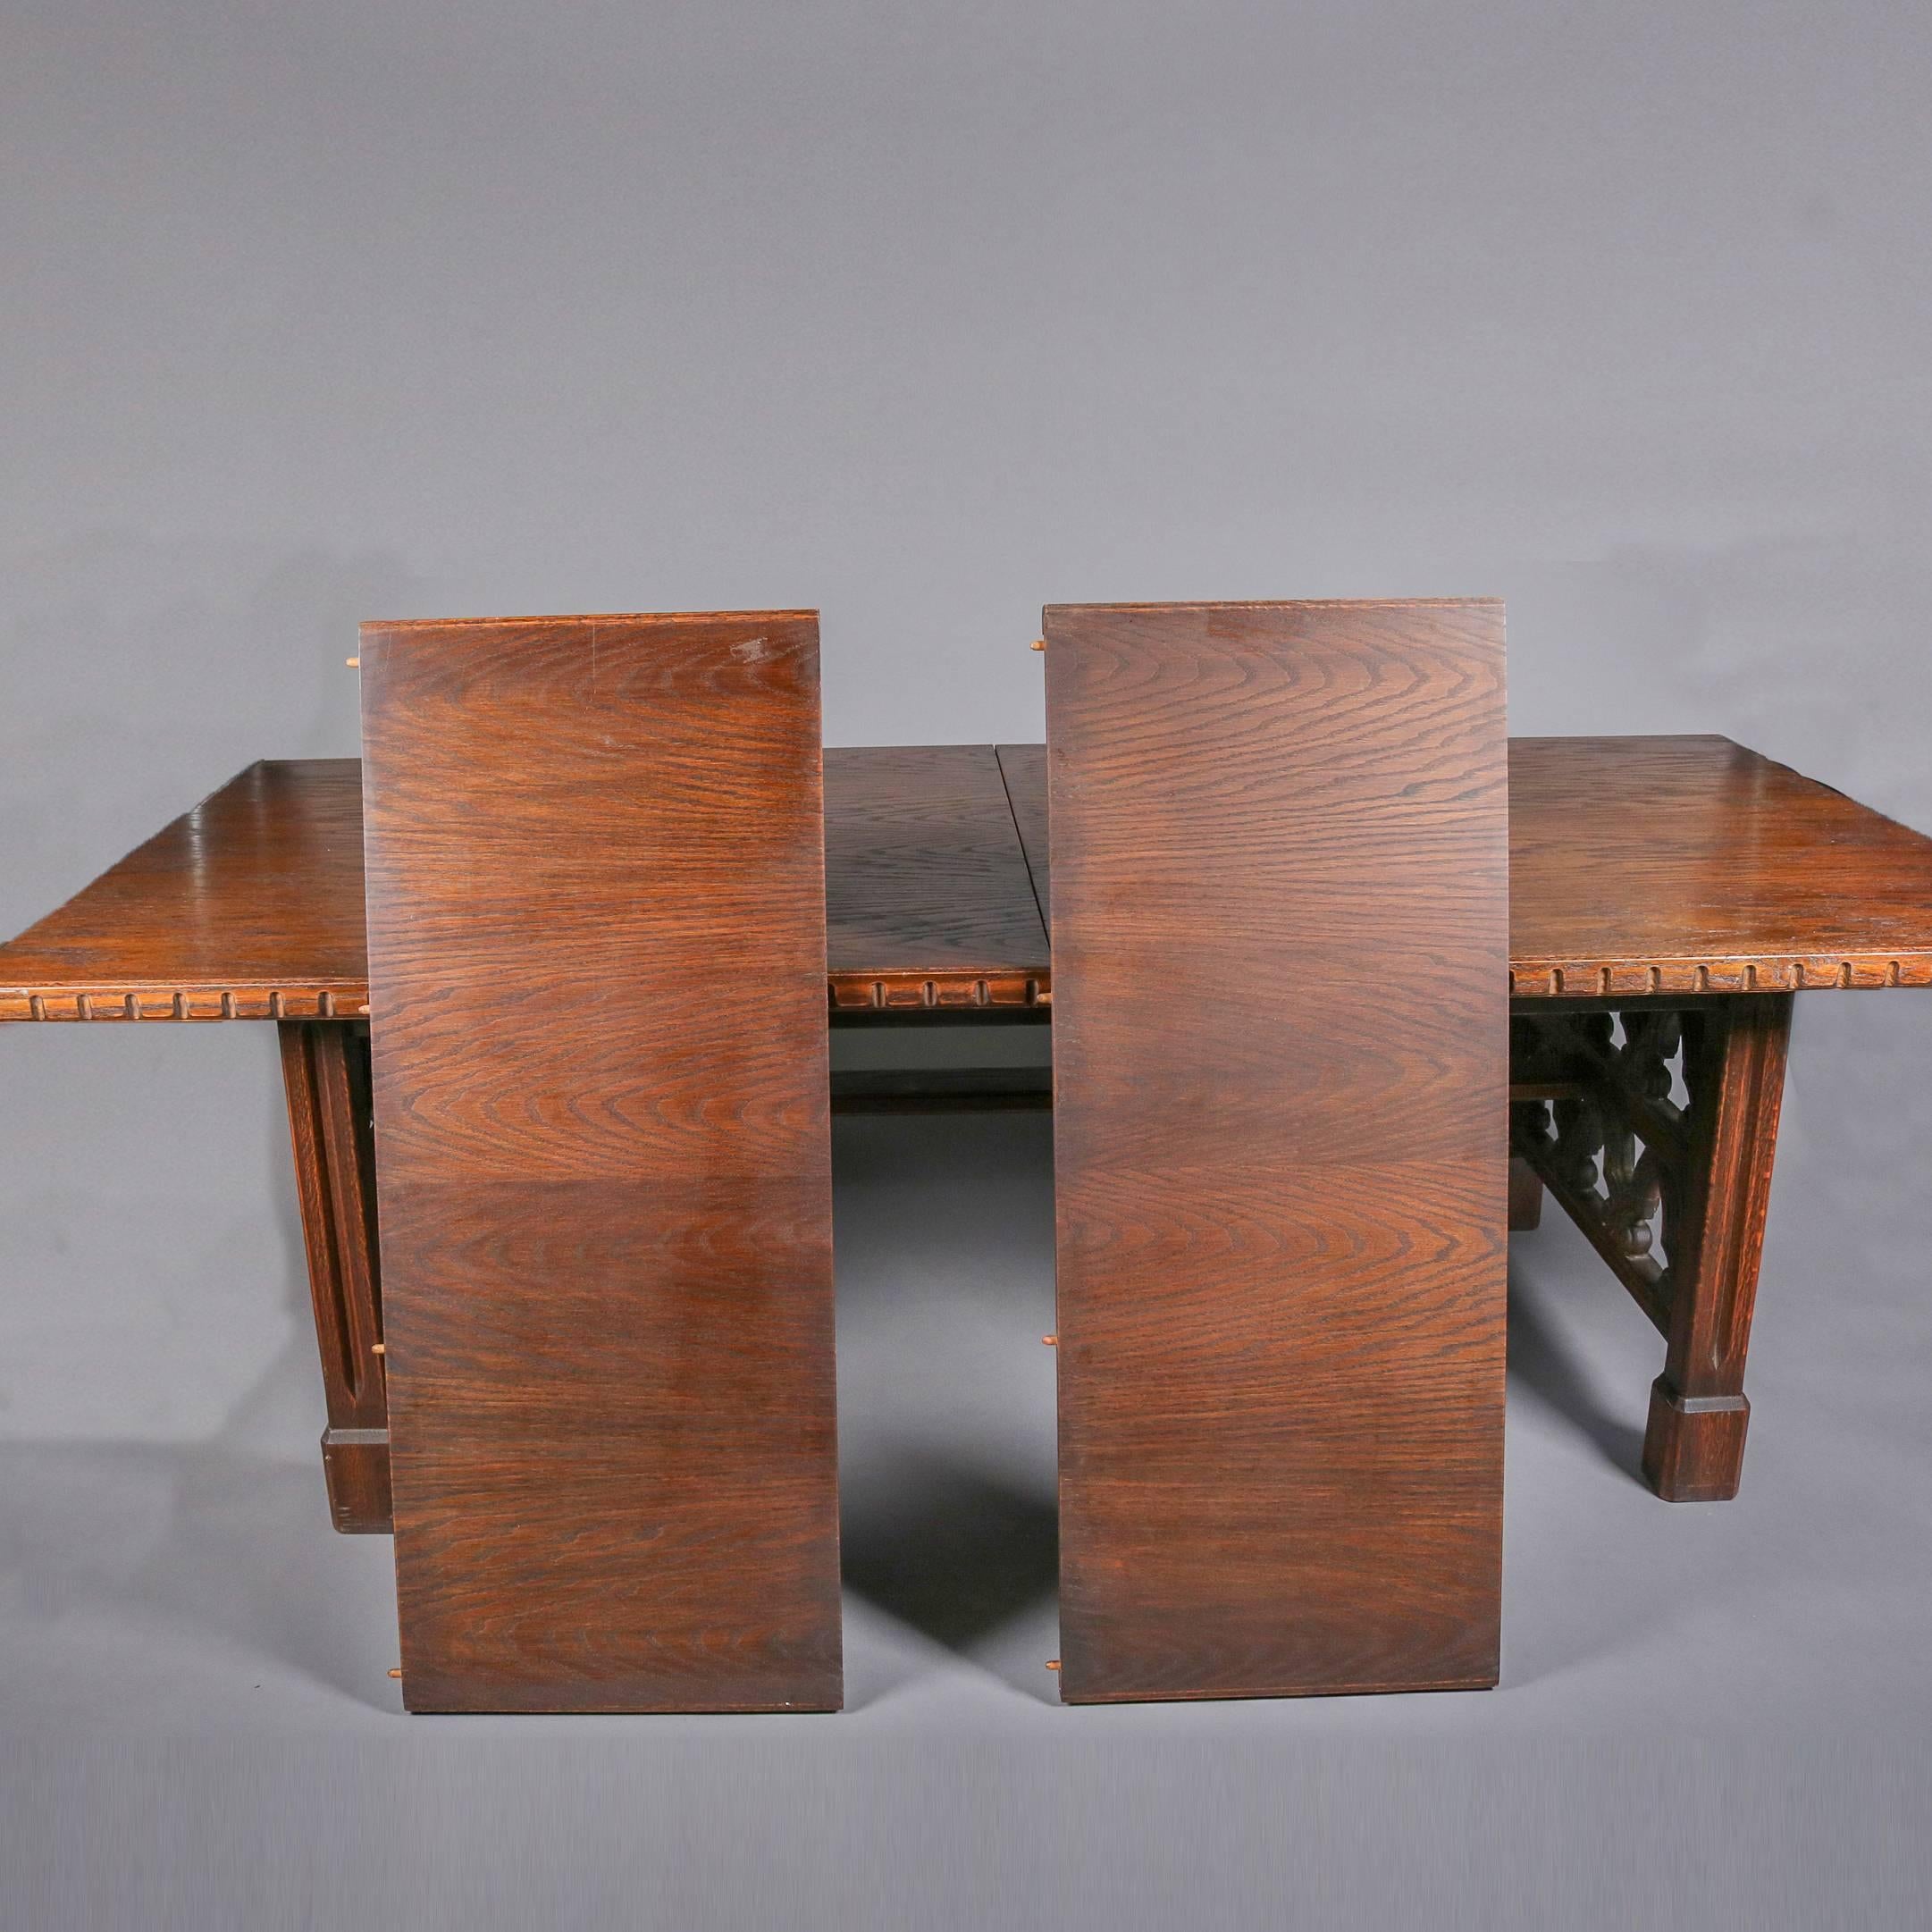 Antique English Carved Walnut Gothic Trestle Table With 2 Leaves, 19th Century 6